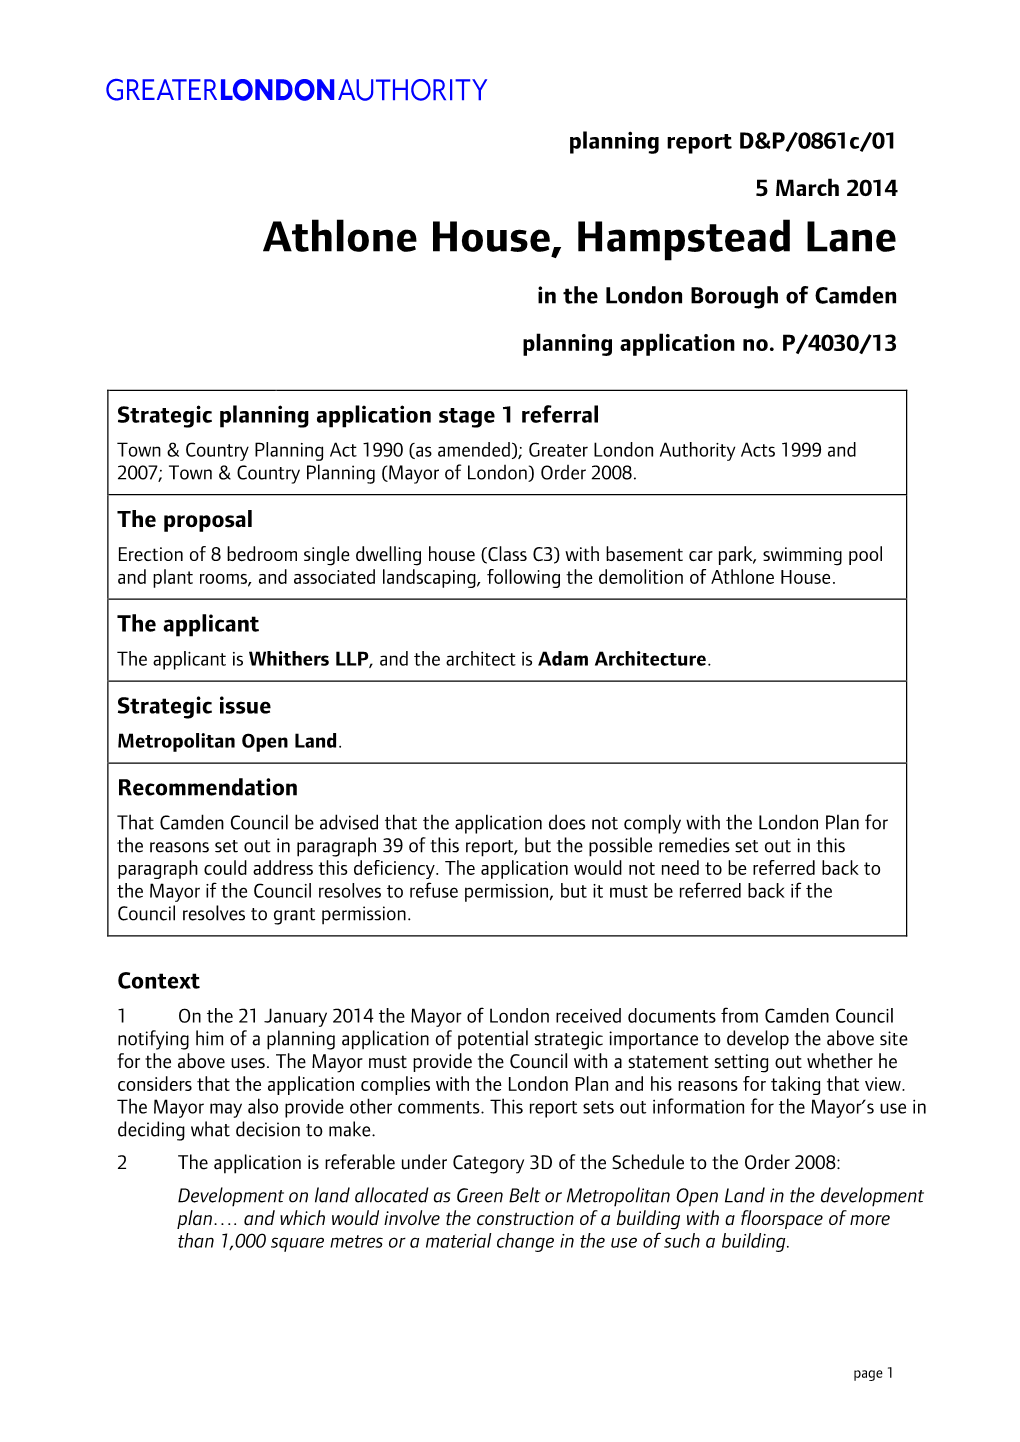 Athlone House, Hampstead Lane in the London Borough of Camden Planning Application No